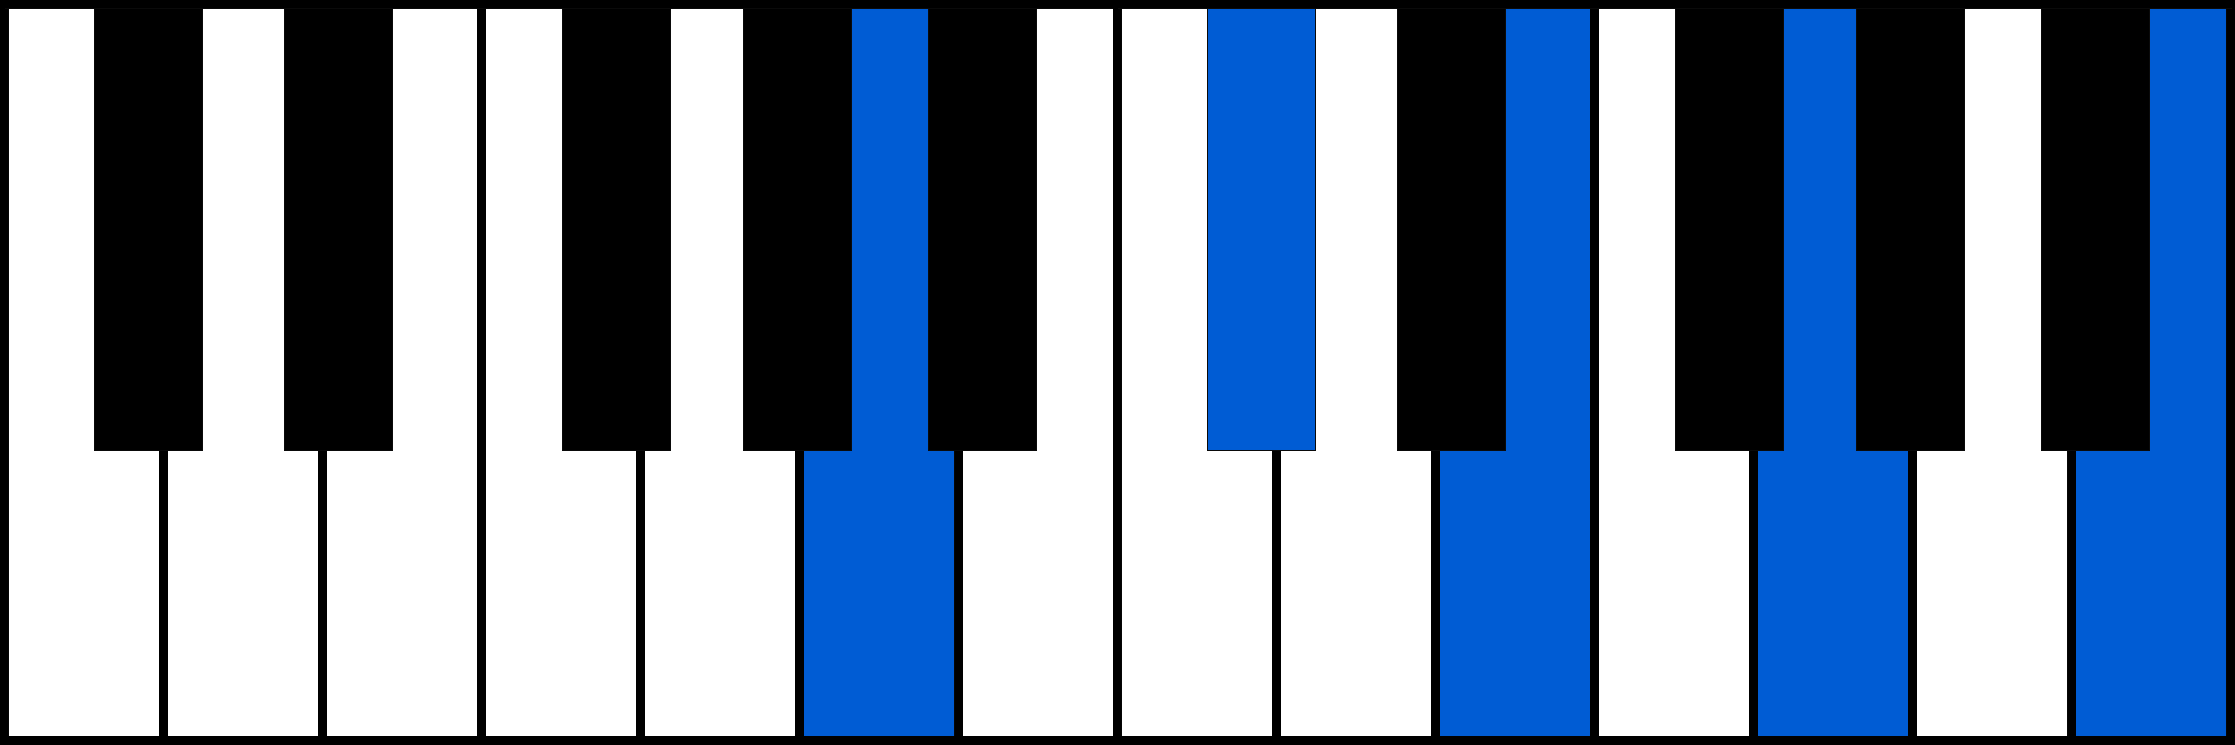 A9 piano chord fingering